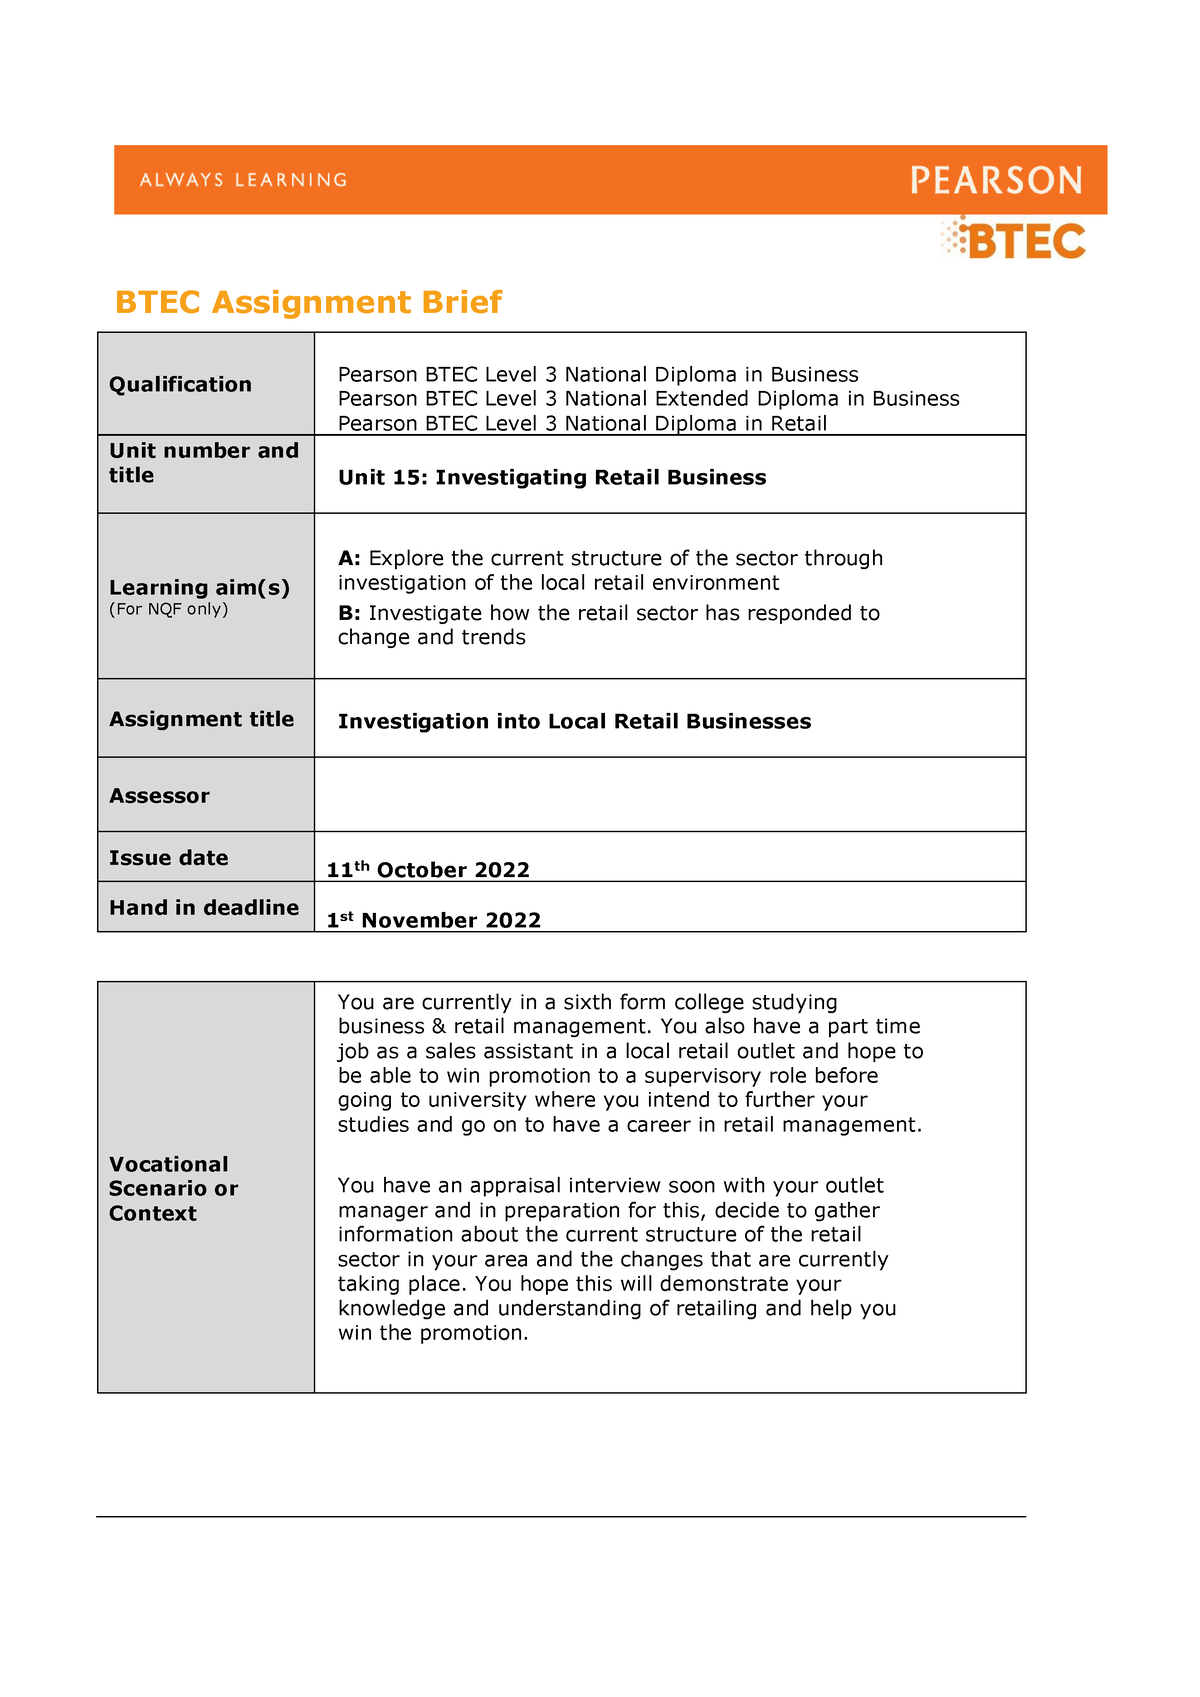 pearson assignment brief iv form